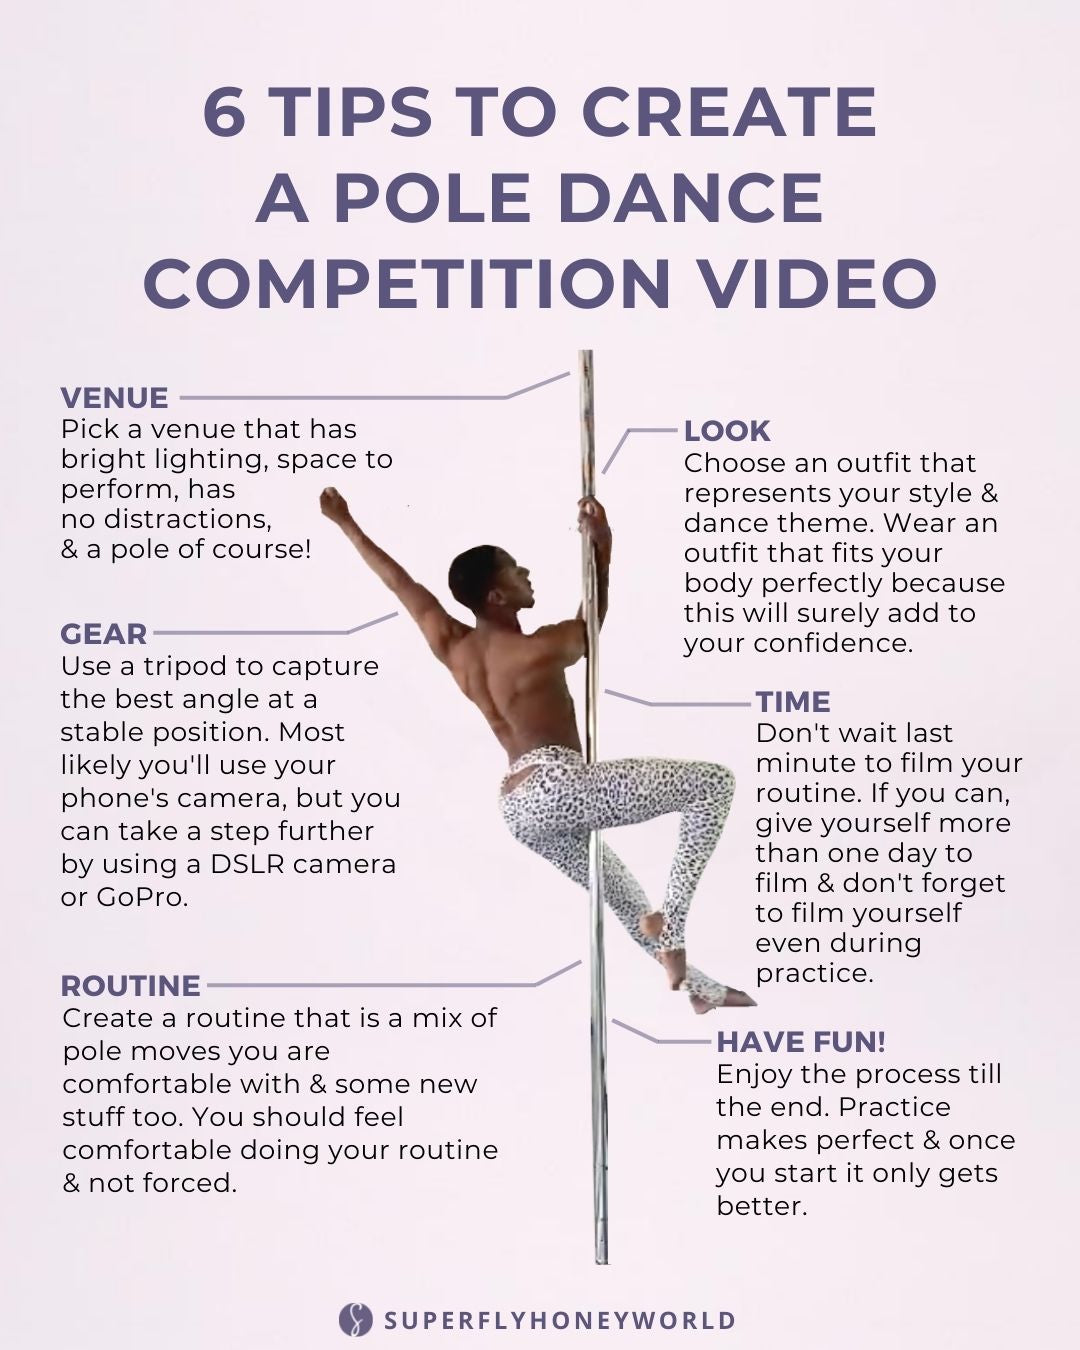 6 Tips to Create a Pole Dance Competition Video - Super Fly Honey